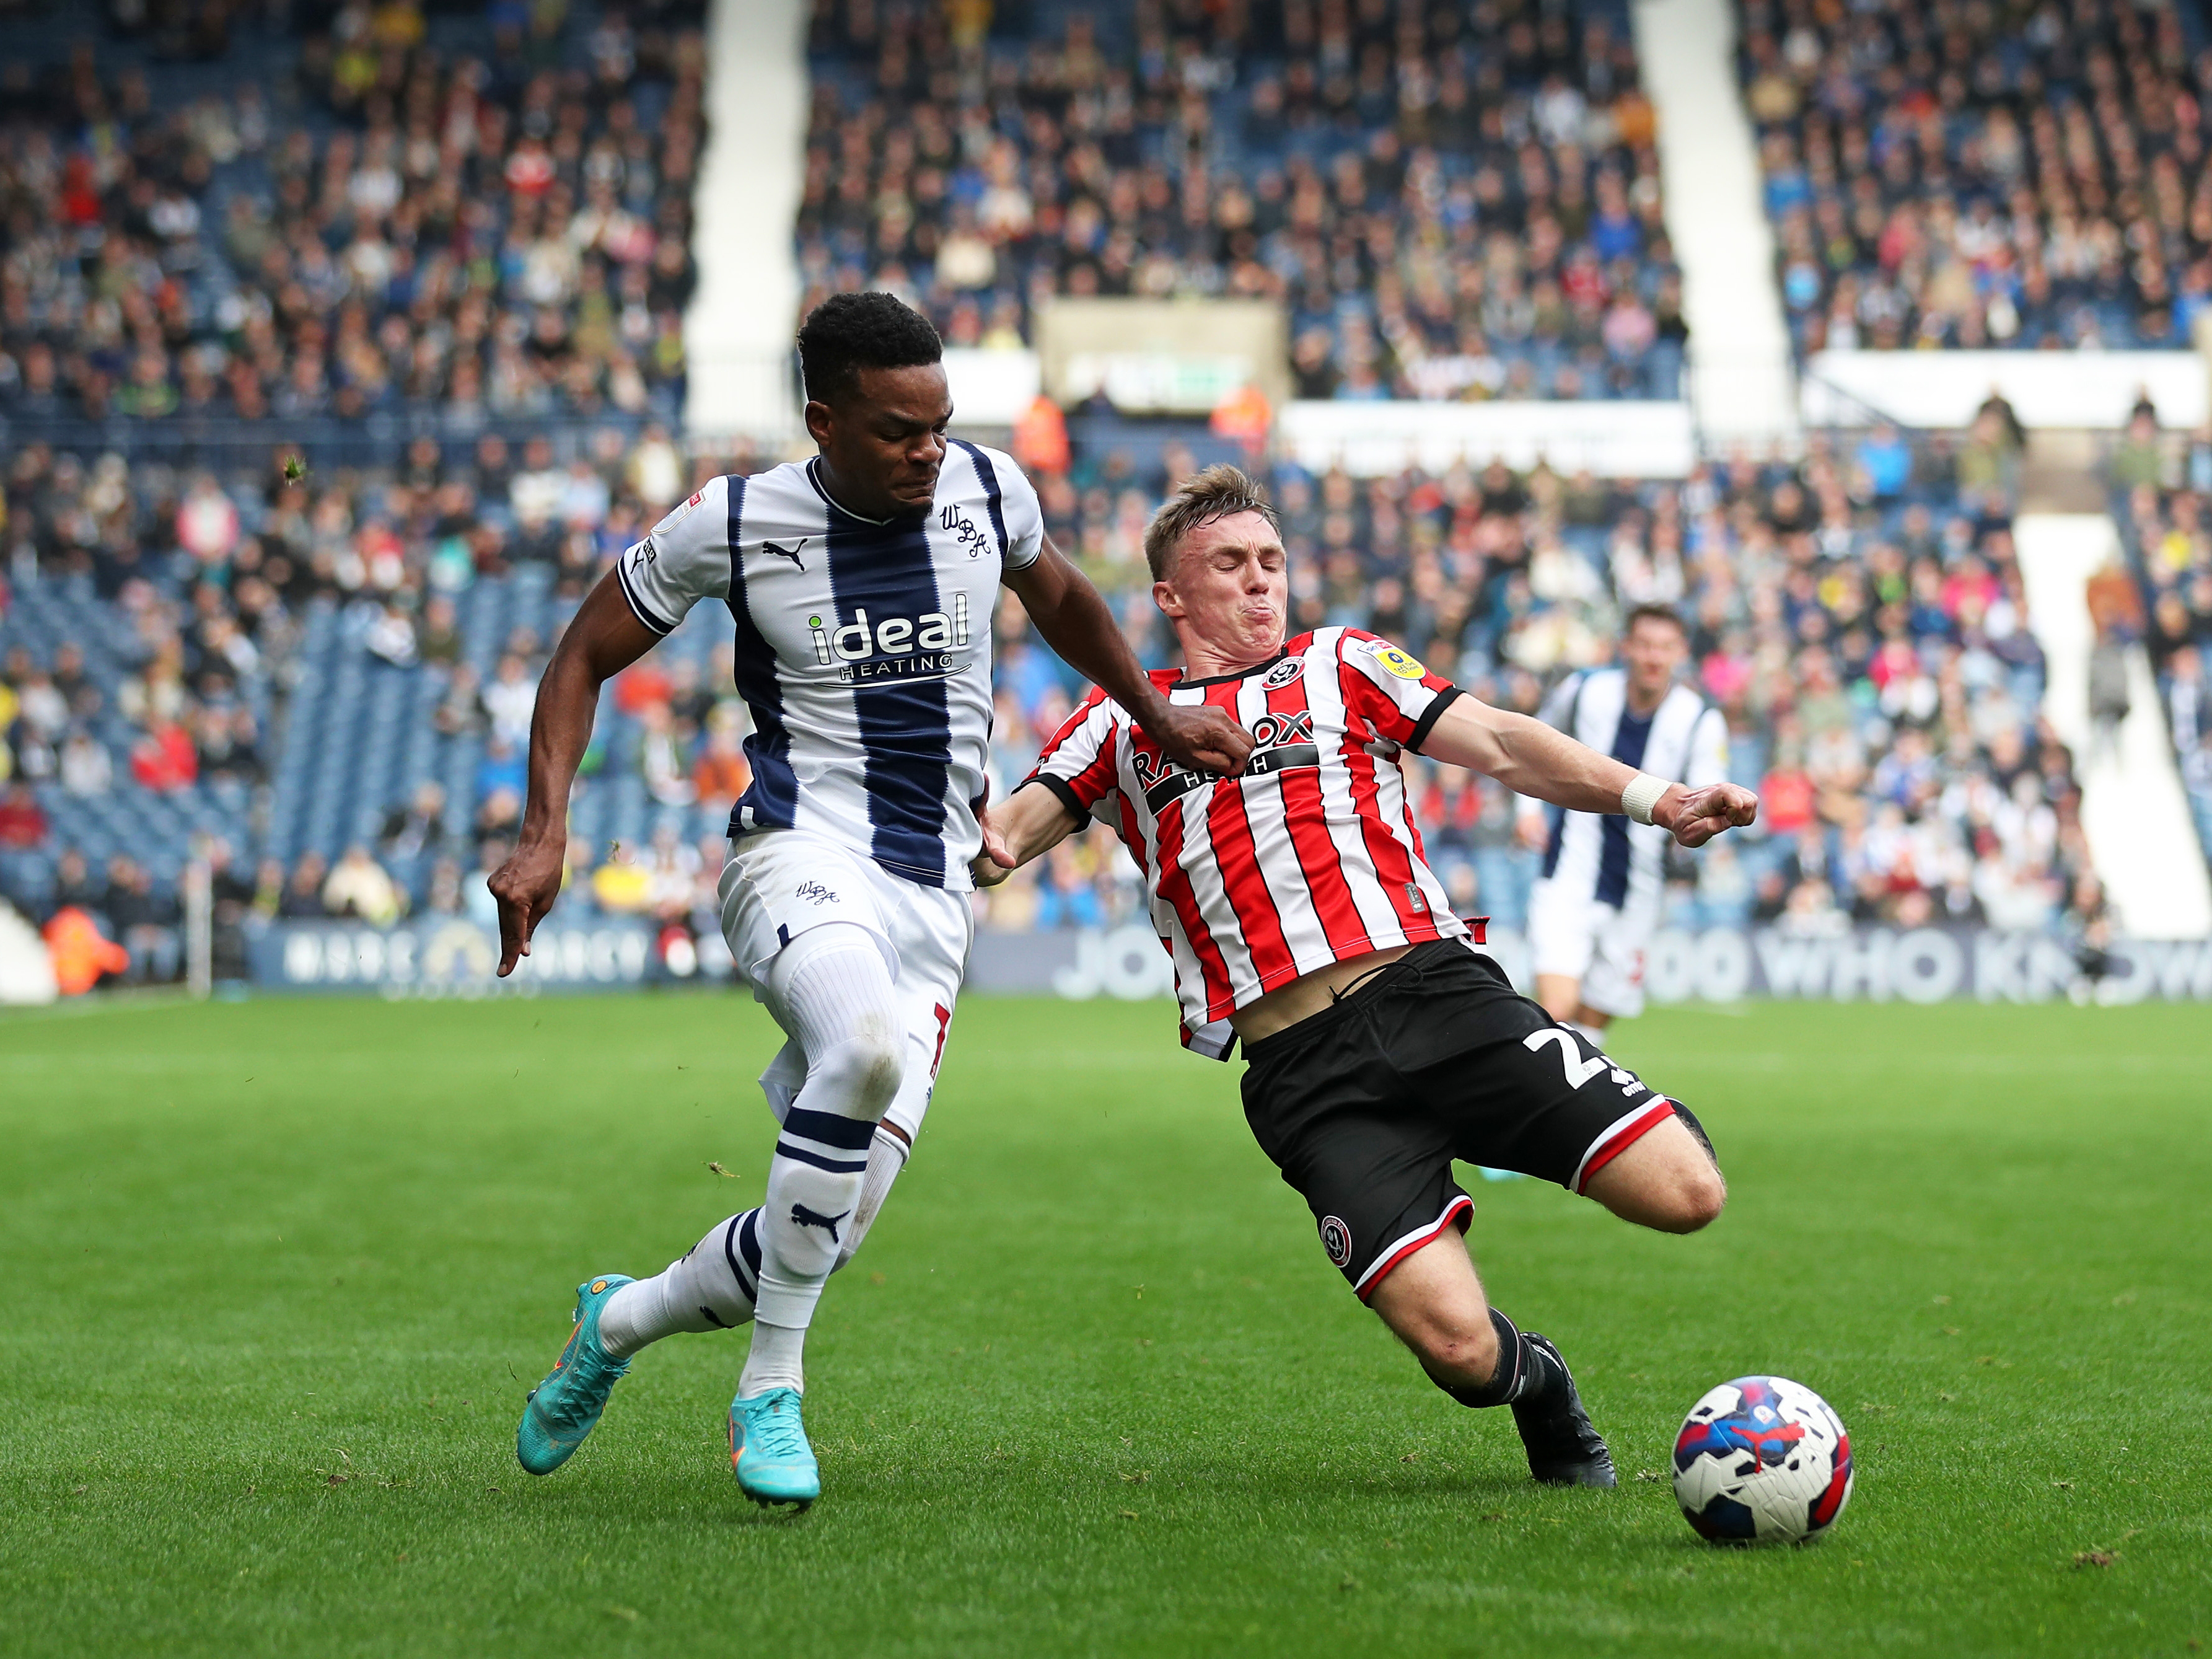 An image of Grady Diangana dribbling against a Sheffield United defender